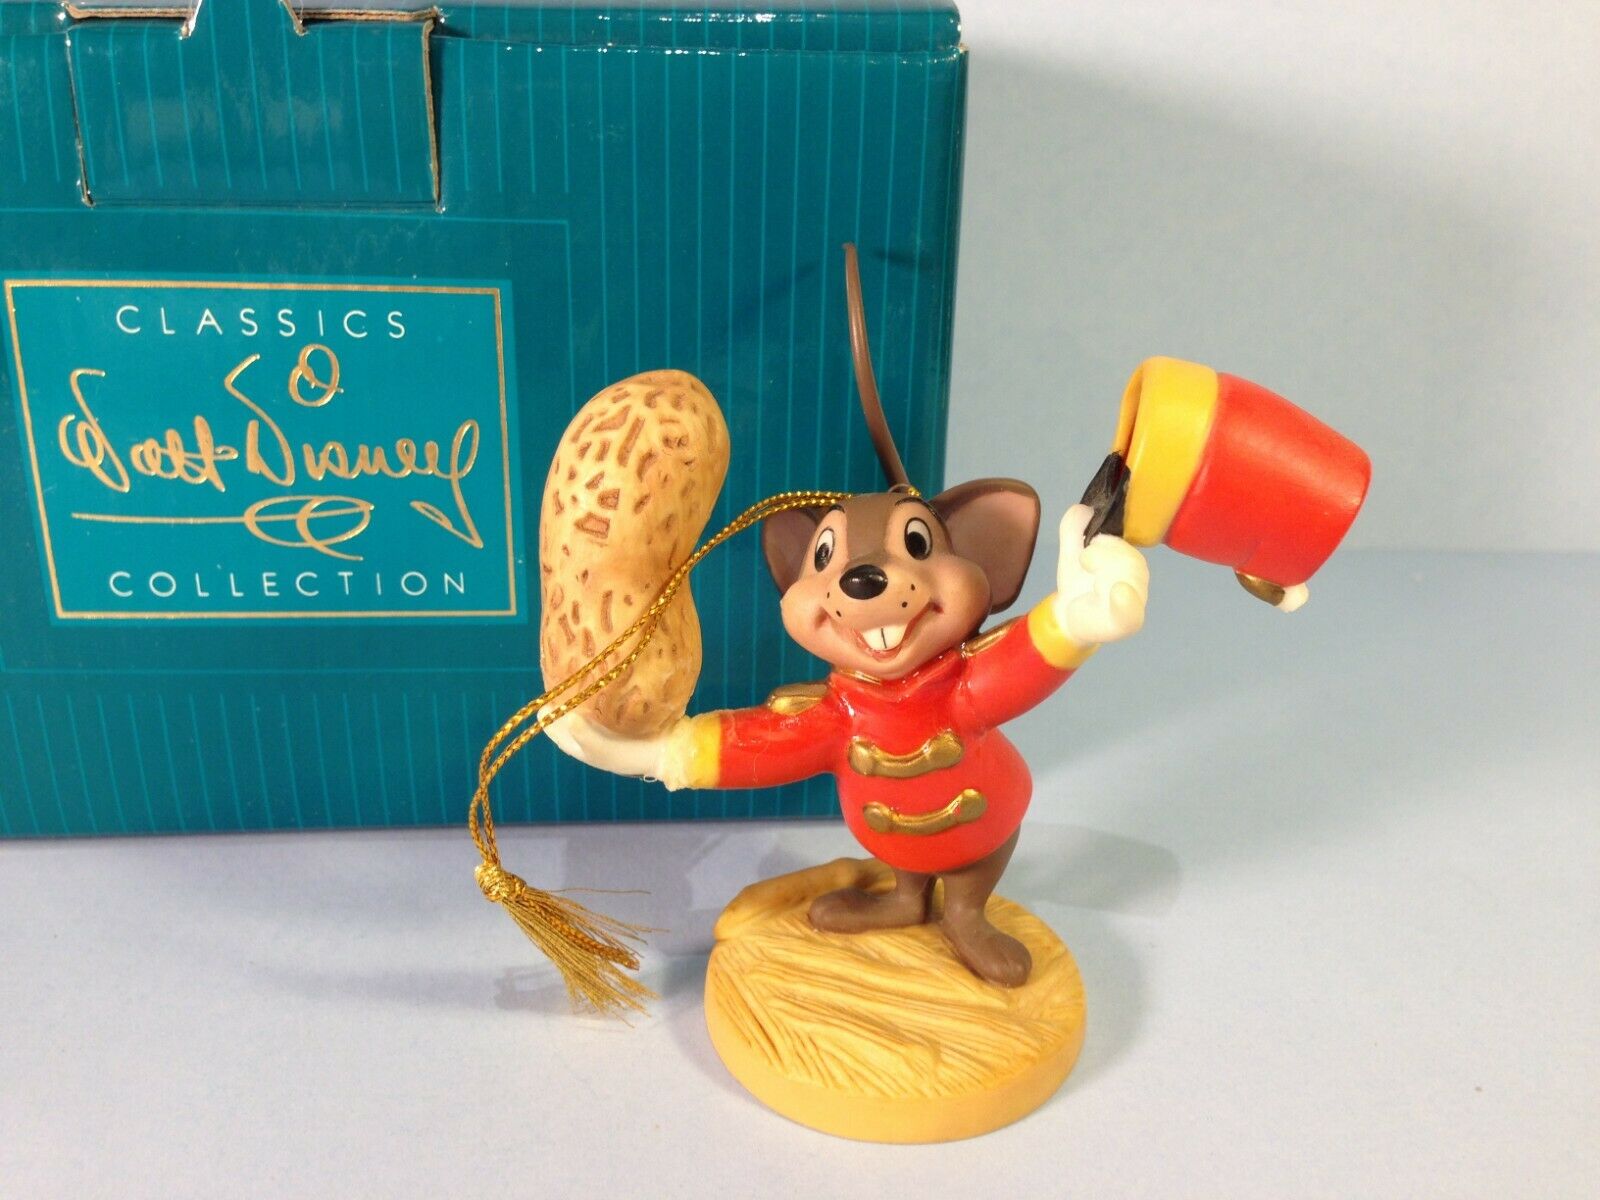 Wdcc Disney Friendship Offering Ornament Timothy Mouse Dumbo W/ Box